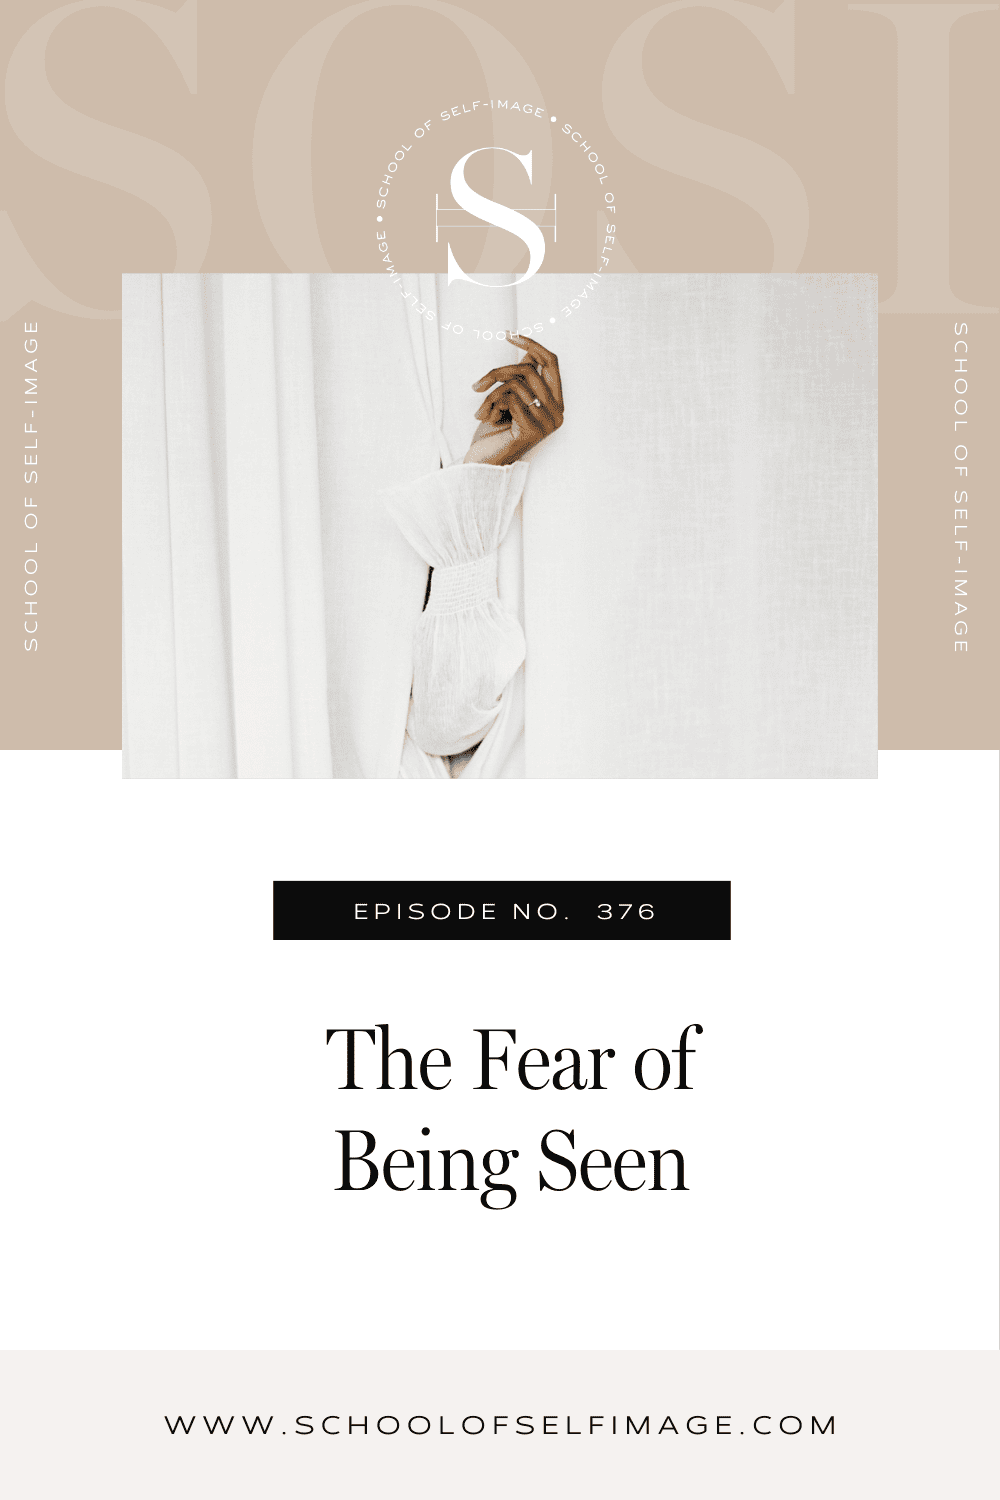 The Fear of Being Seen